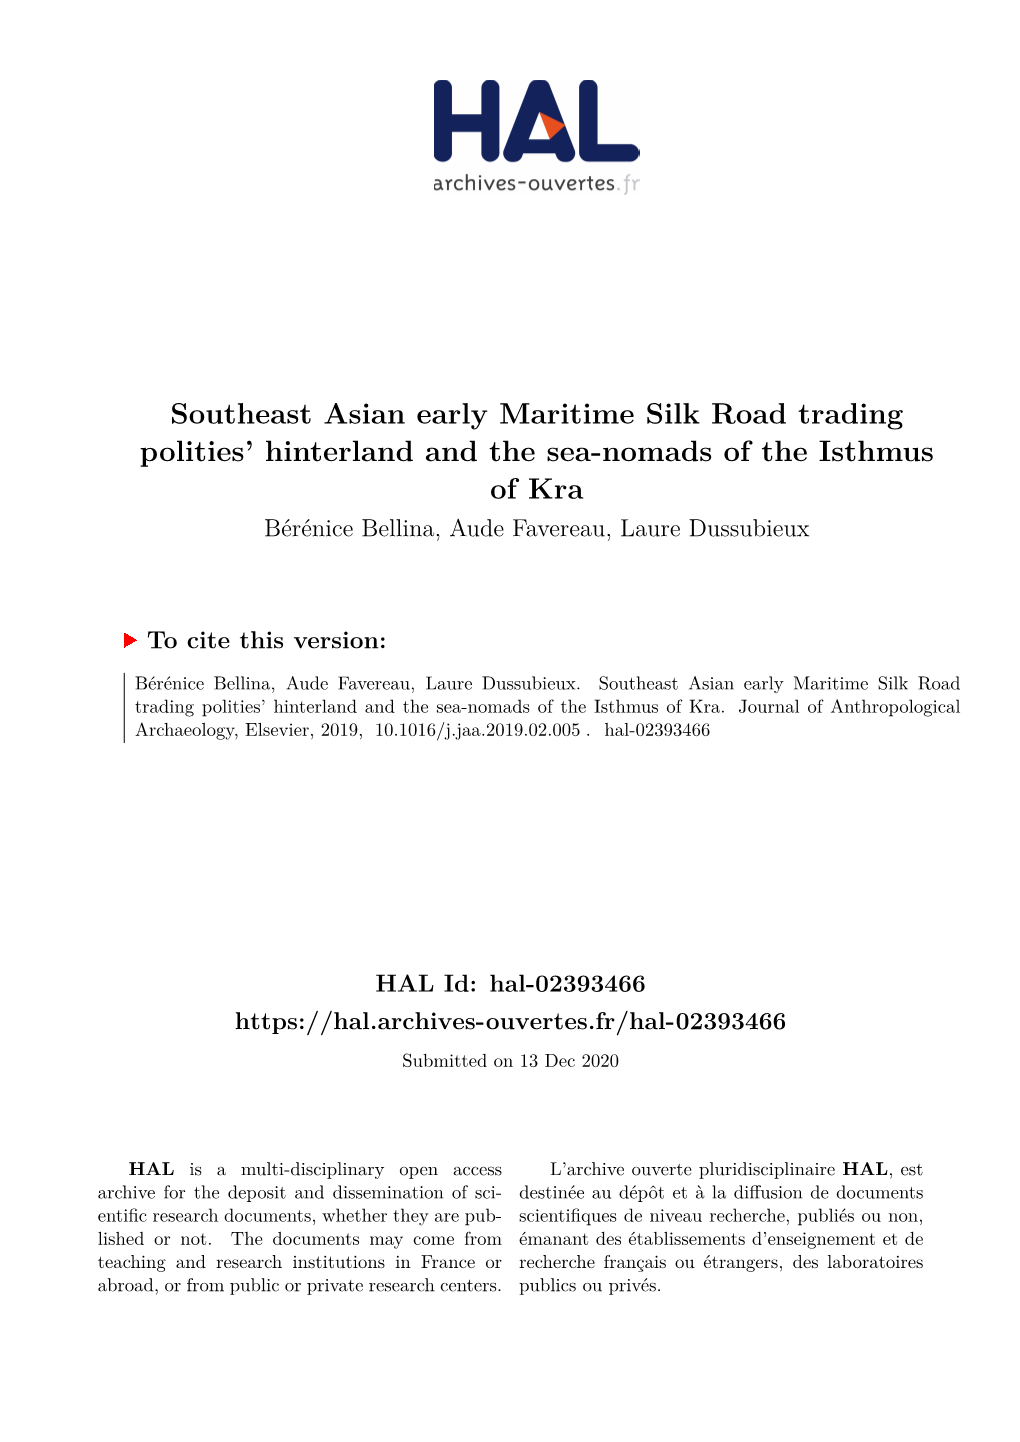 Southeast Asian Early Maritime Silk Road Trading Polities’ Hinterland and the Sea-Nomads of the Isthmus of Kra Bérénice Bellina, Aude Favereau, Laure Dussubieux